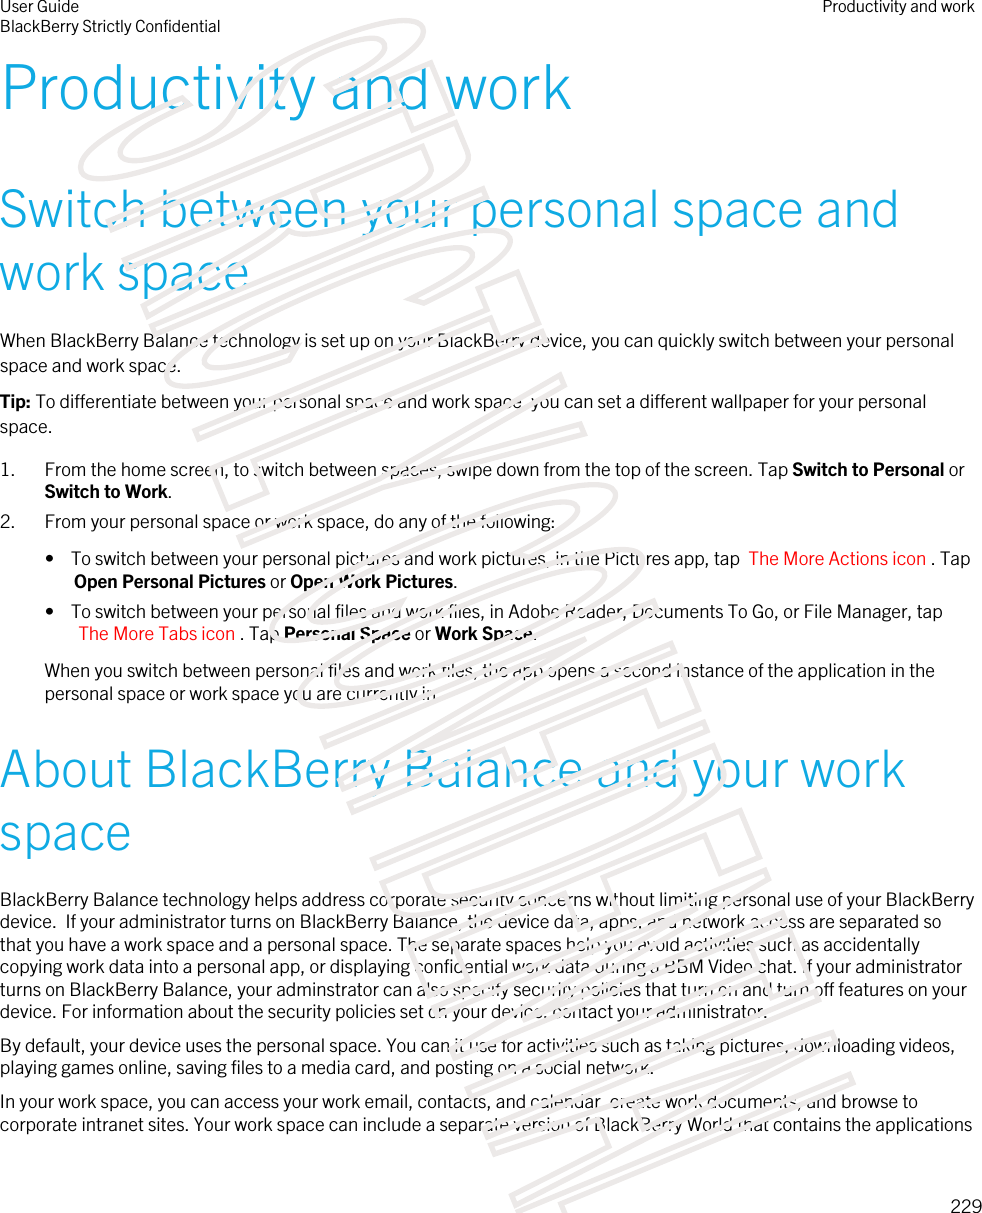 Productivity and workSwitch between your personal space and work spaceWhen BlackBerry Balance technology is set up on your BlackBerry device, you can quickly switch between your personal space and work space.Tip: To differentiate between your personal space and work space, you can set a different wallpaper for your personal space.1. From the home screen, to switch between spaces, swipe down from the top of the screen. Tap Switch to Personal or Switch to Work.2. From your personal space or work space, do any of the following:•  To switch between your personal pictures and work pictures, in the Pictures app, tap  The More Actions icon . Tap Open Personal Pictures or Open Work Pictures.•  To switch between your personal files and work files, in Adobe Reader, Documents To Go, or File Manager, tap The More Tabs icon . Tap Personal Space or Work Space.When you switch between personal files and work files, the app opens a second instance of the application in the personal space or work space you are currently in.About BlackBerry Balance and your work spaceBlackBerry Balance technology helps address corporate security concerns without limiting personal use of your BlackBerry device.  If your administrator turns on BlackBerry Balance, the device data, apps, and network access are separated so that you have a work space and a personal space. The separate spaces help you avoid activities such as accidentally copying work data into a personal app, or displaying confidential work data during a BBM Video chat. If your administrator turns on BlackBerry Balance, your adminstrator can also specify security policies that turn on and turn off features on your device. For information about the security policies set on your device, contact your administrator.By default, your device uses the personal space. You can it use for activities such as taking pictures, downloading videos, playing games online, saving files to a media card, and posting on a social network. In your work space, you can access your work email, contacts, and calendar, create work documents, and browse to corporate intranet sites. Your work space can include a separate version of BlackBerry World that contains the applications User GuideBlackBerry Strictly Confidential Productivity and work229STRICTLY CONFIDENTIAL